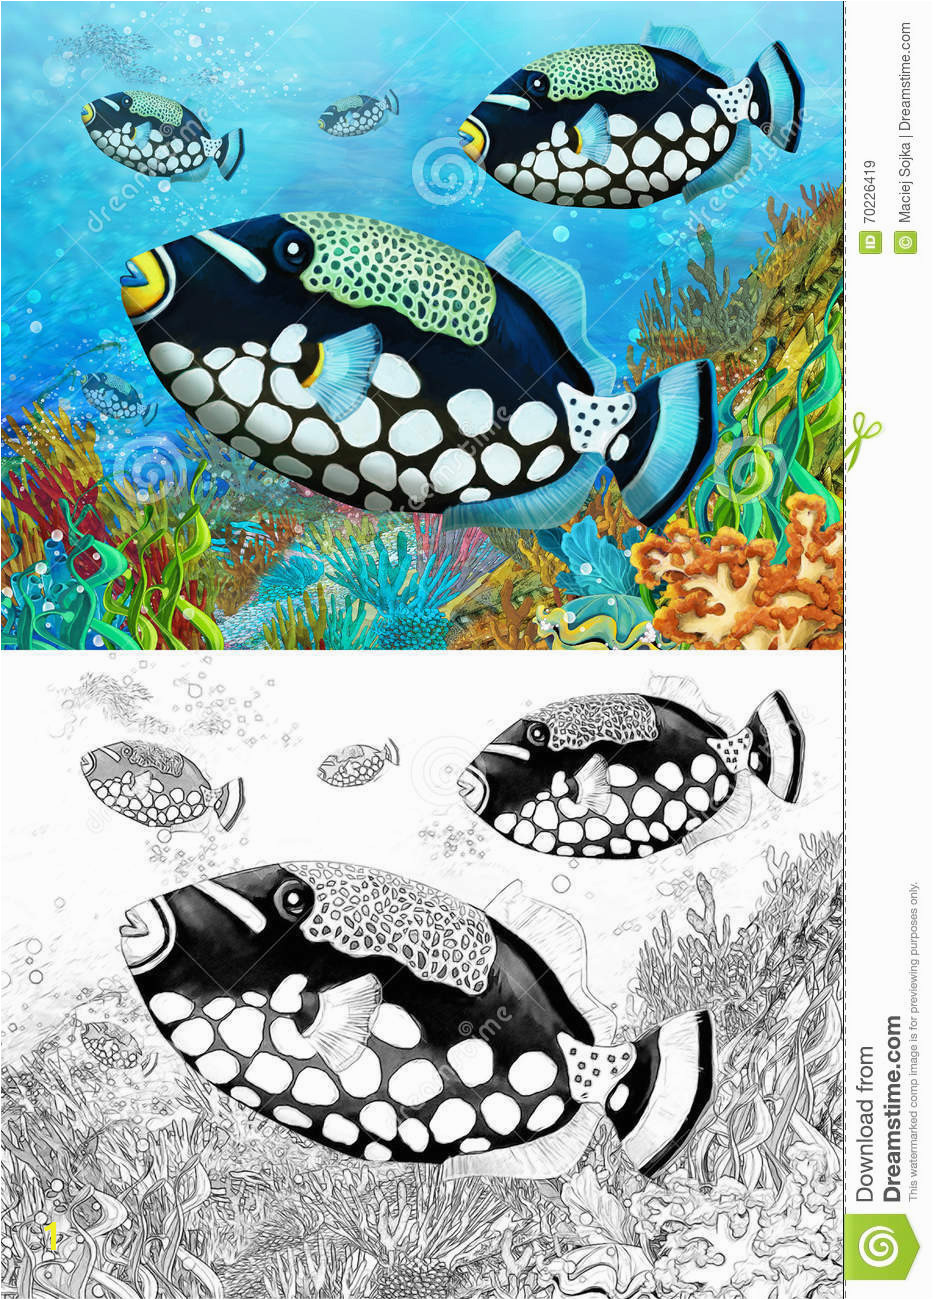 Coral Reef Coloring Pages the Coral Reef Small Colorful Coral Fishes with Coloring Page